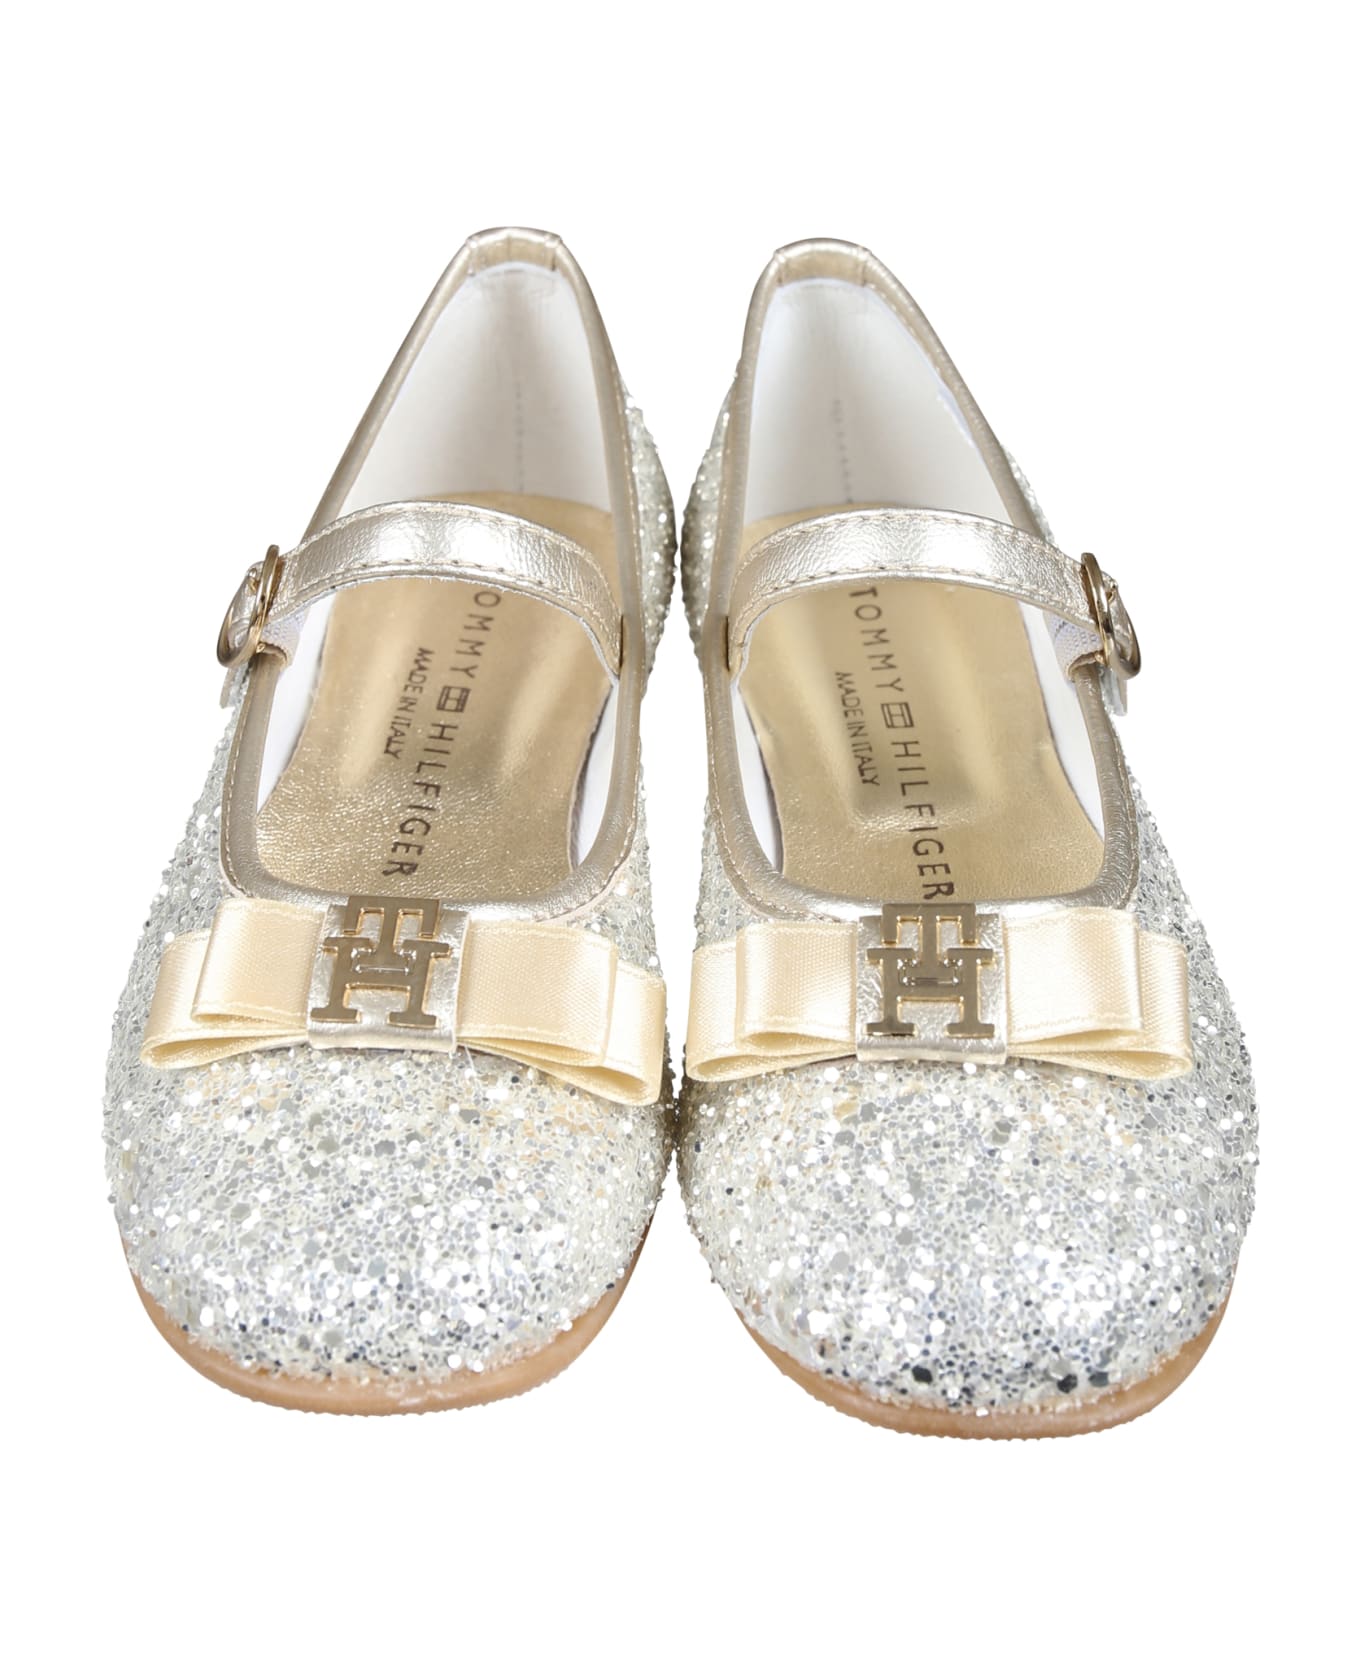 Tommy Hilfiger Gold Ballerines For Girl With Bow And Logo - Gold